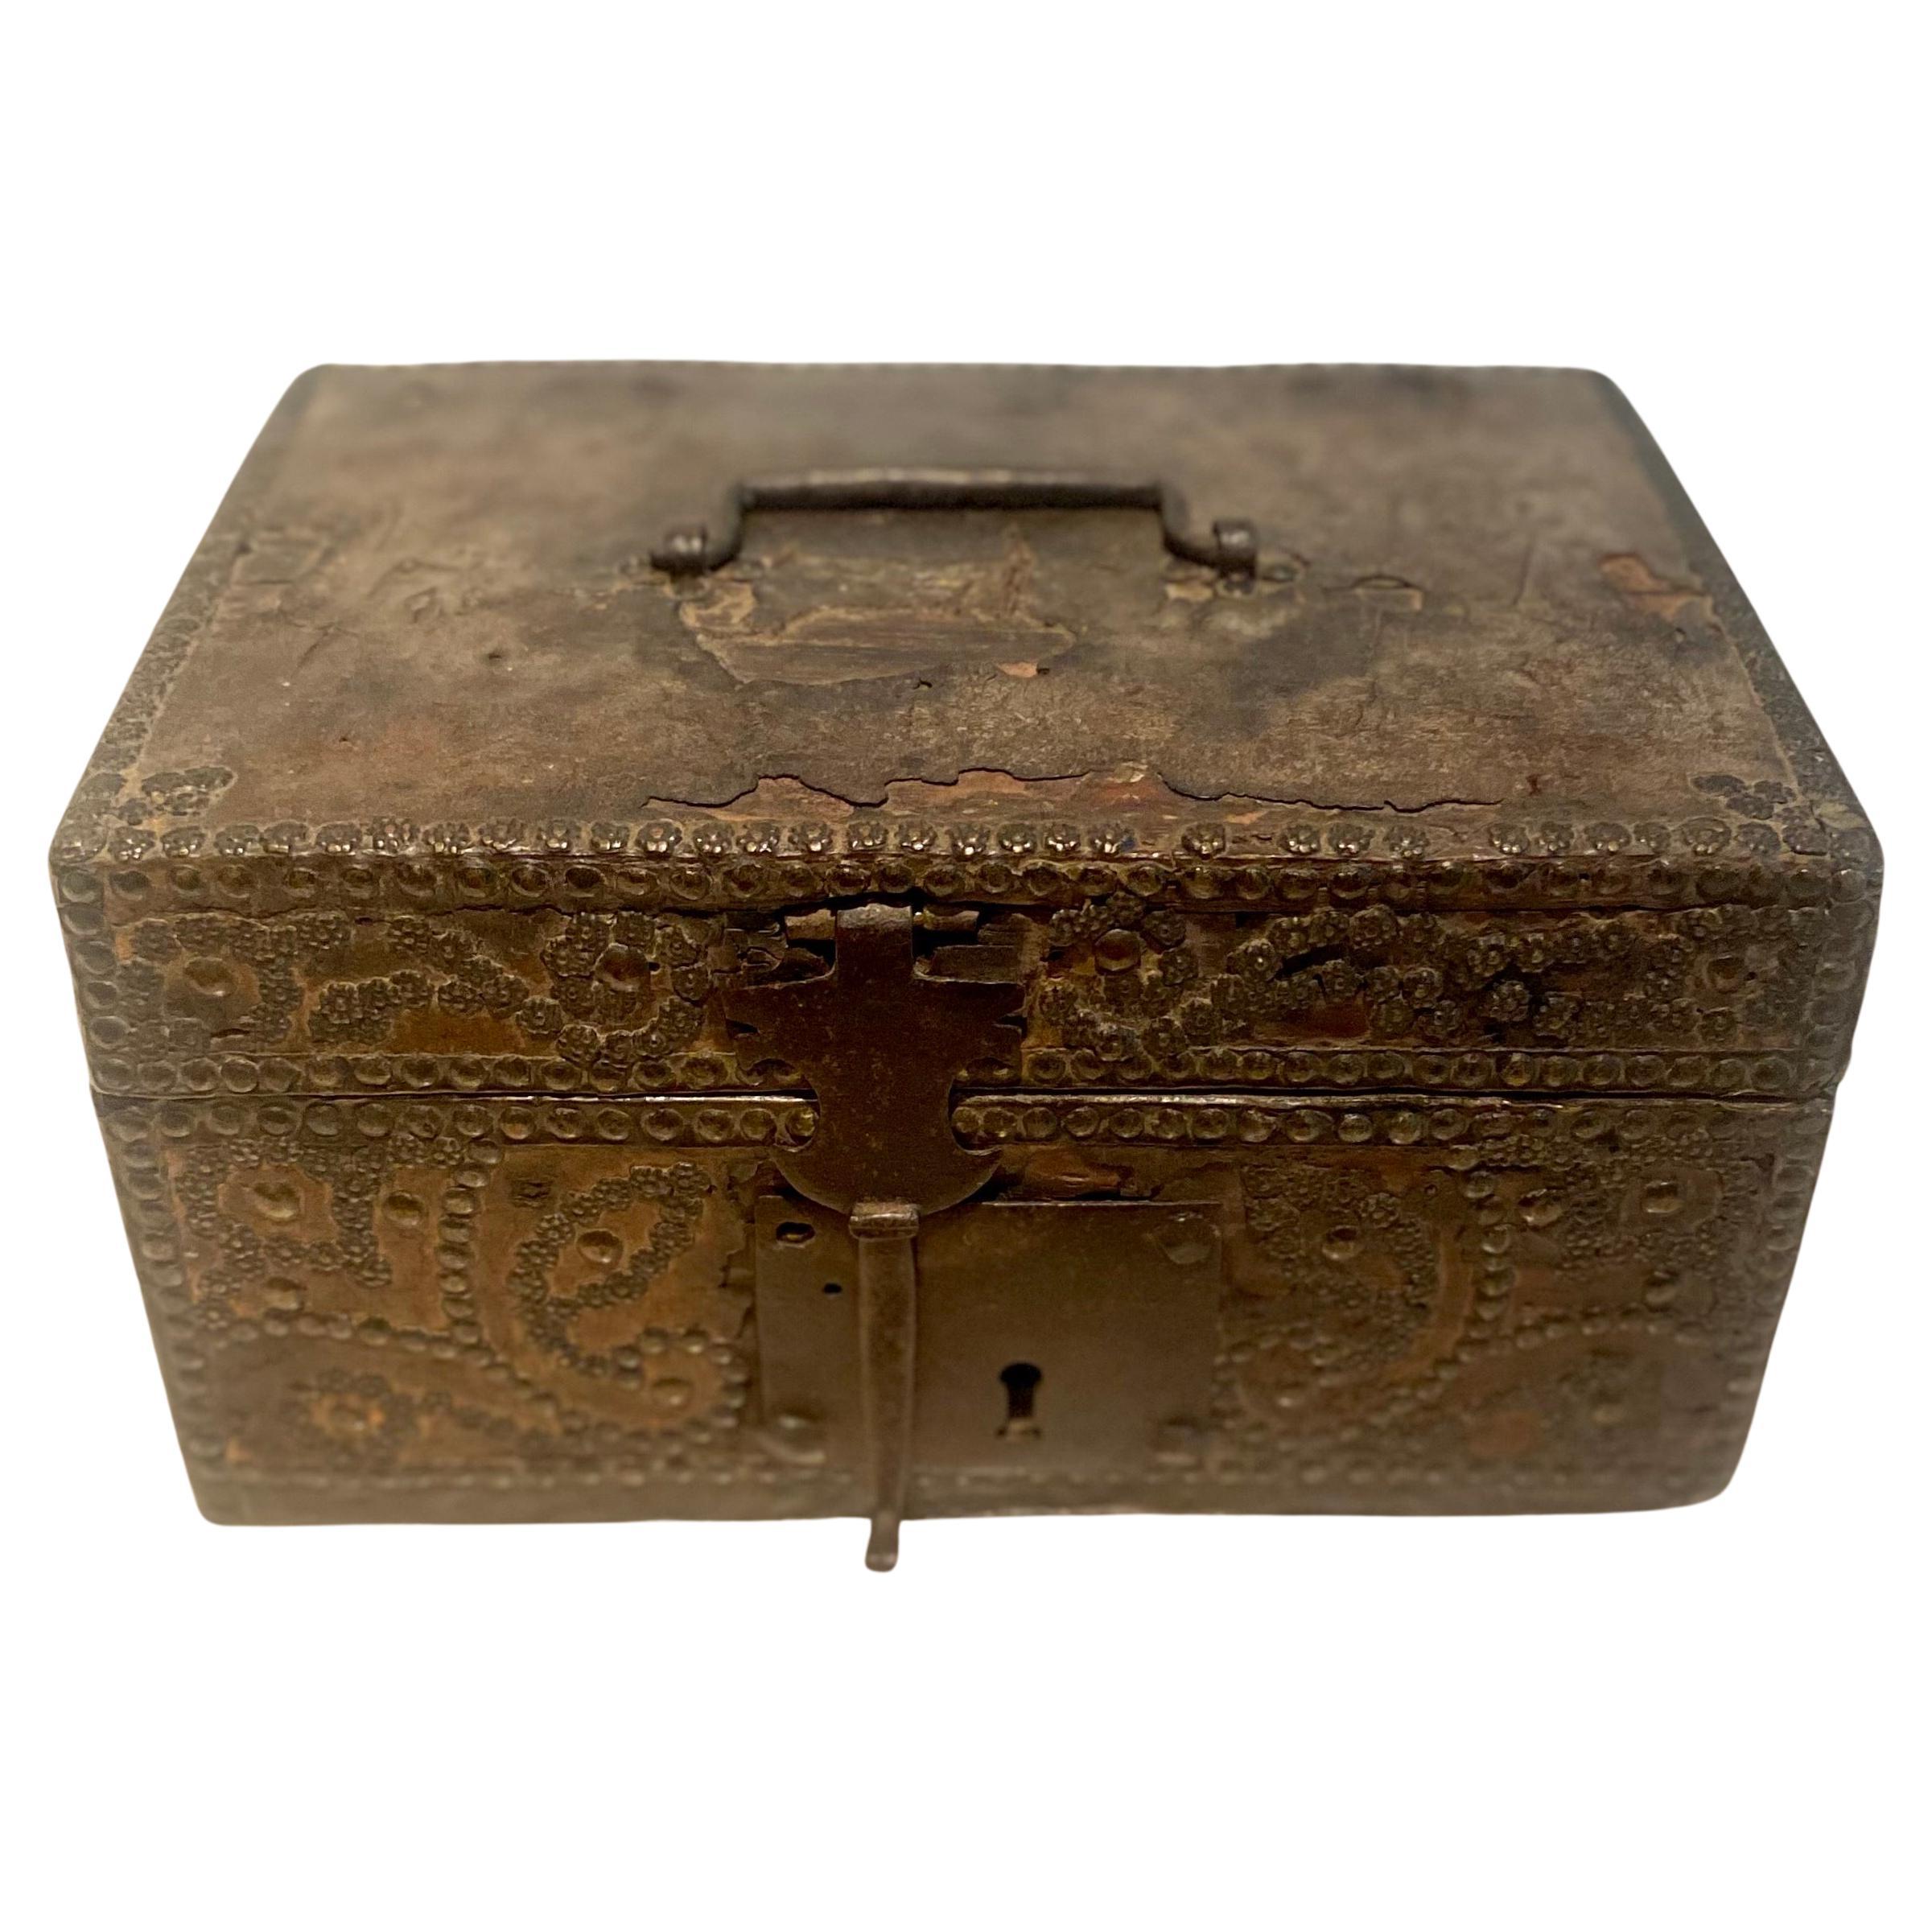 Wonderful messenger box from the Louis XIV period, late 17th early 18th century.
This pretty box is made of leather-wrapped wood decorated with copper nails forming scrolls and flowers on the front of the box. Some nails are themselves in the shape